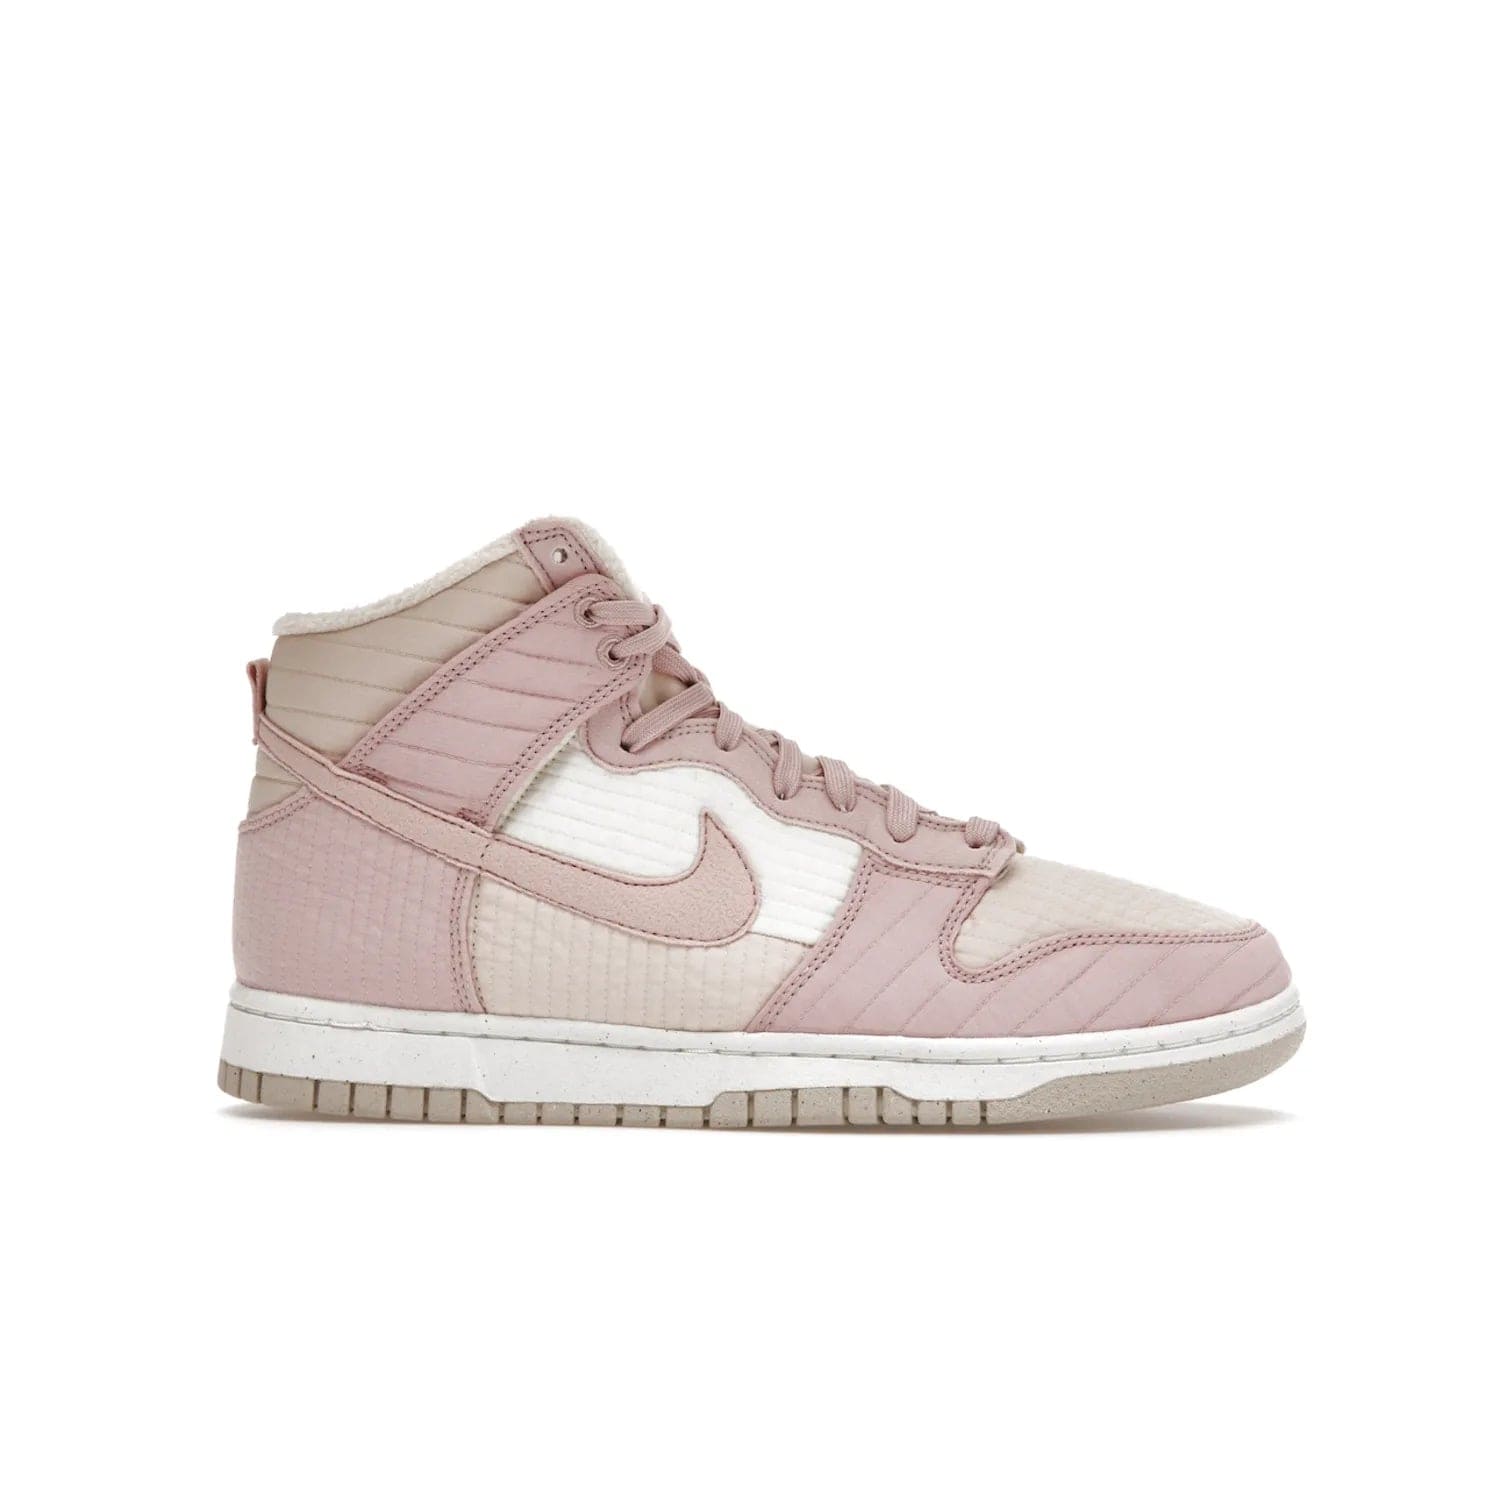 Nike Dunk High LX Next Nature Pink Oxford (Women's) - Image 2 - Only at www.BallersClubKickz.com - Cozy up in the Nike Dunk High LX Next Nature Pink Oxford for Women. Quilted upper, white midsole, soft fleece interior provide warmth and comfort for cold winter nights.